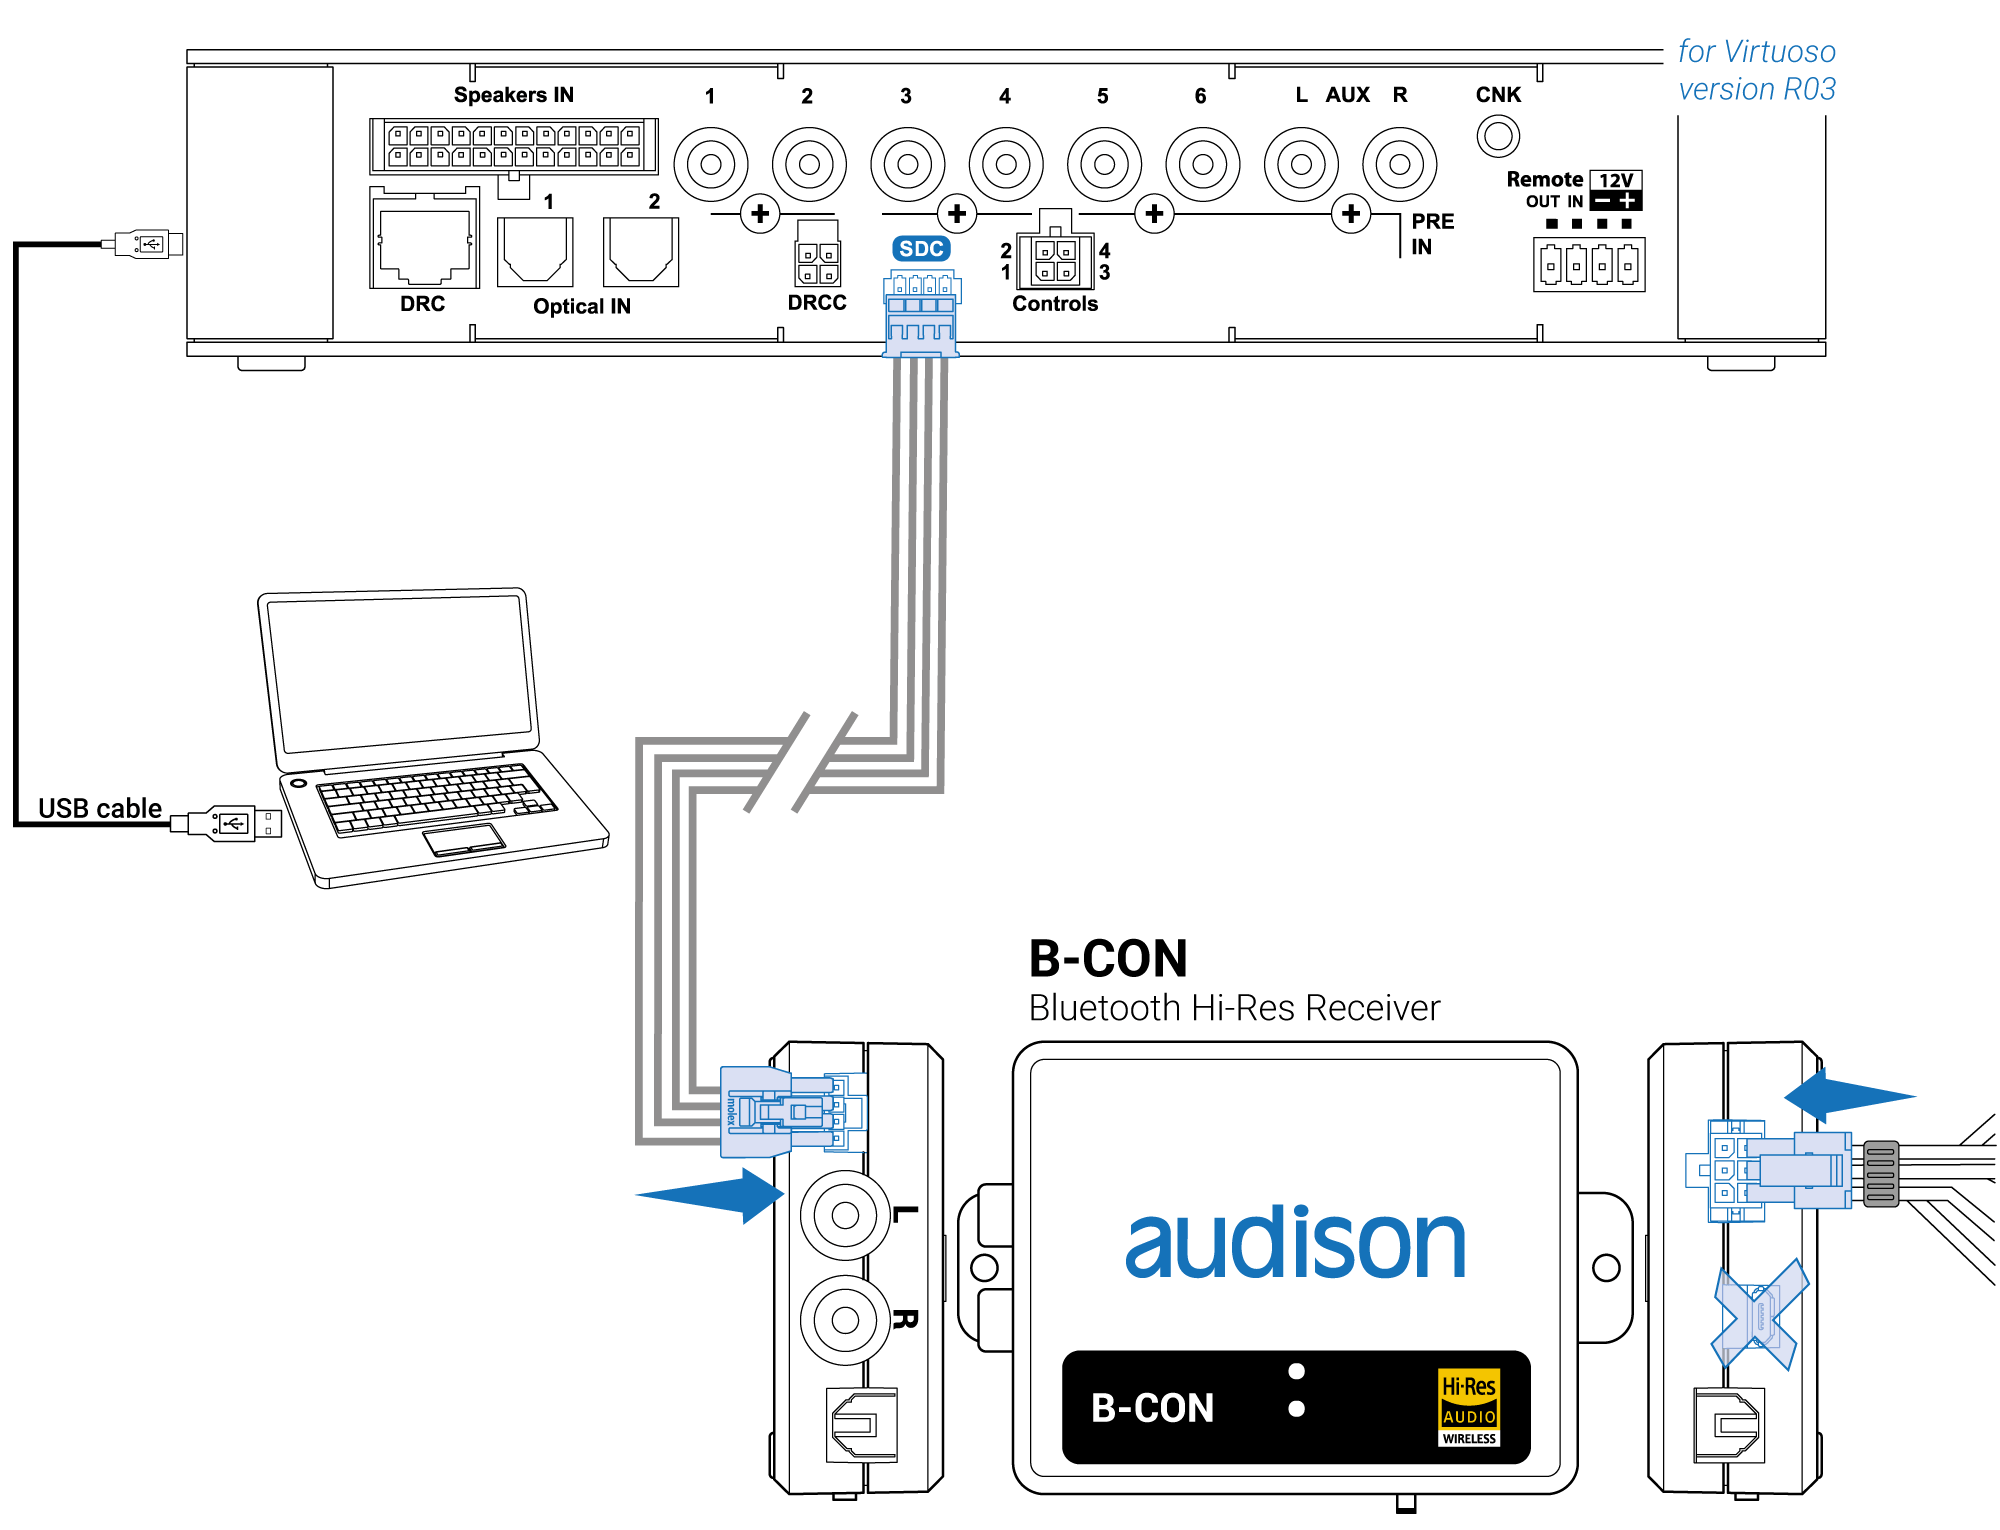 3_Agg.-FW-B-CON-virtuoso-R03_1_cavo-usb-to-ADC.png